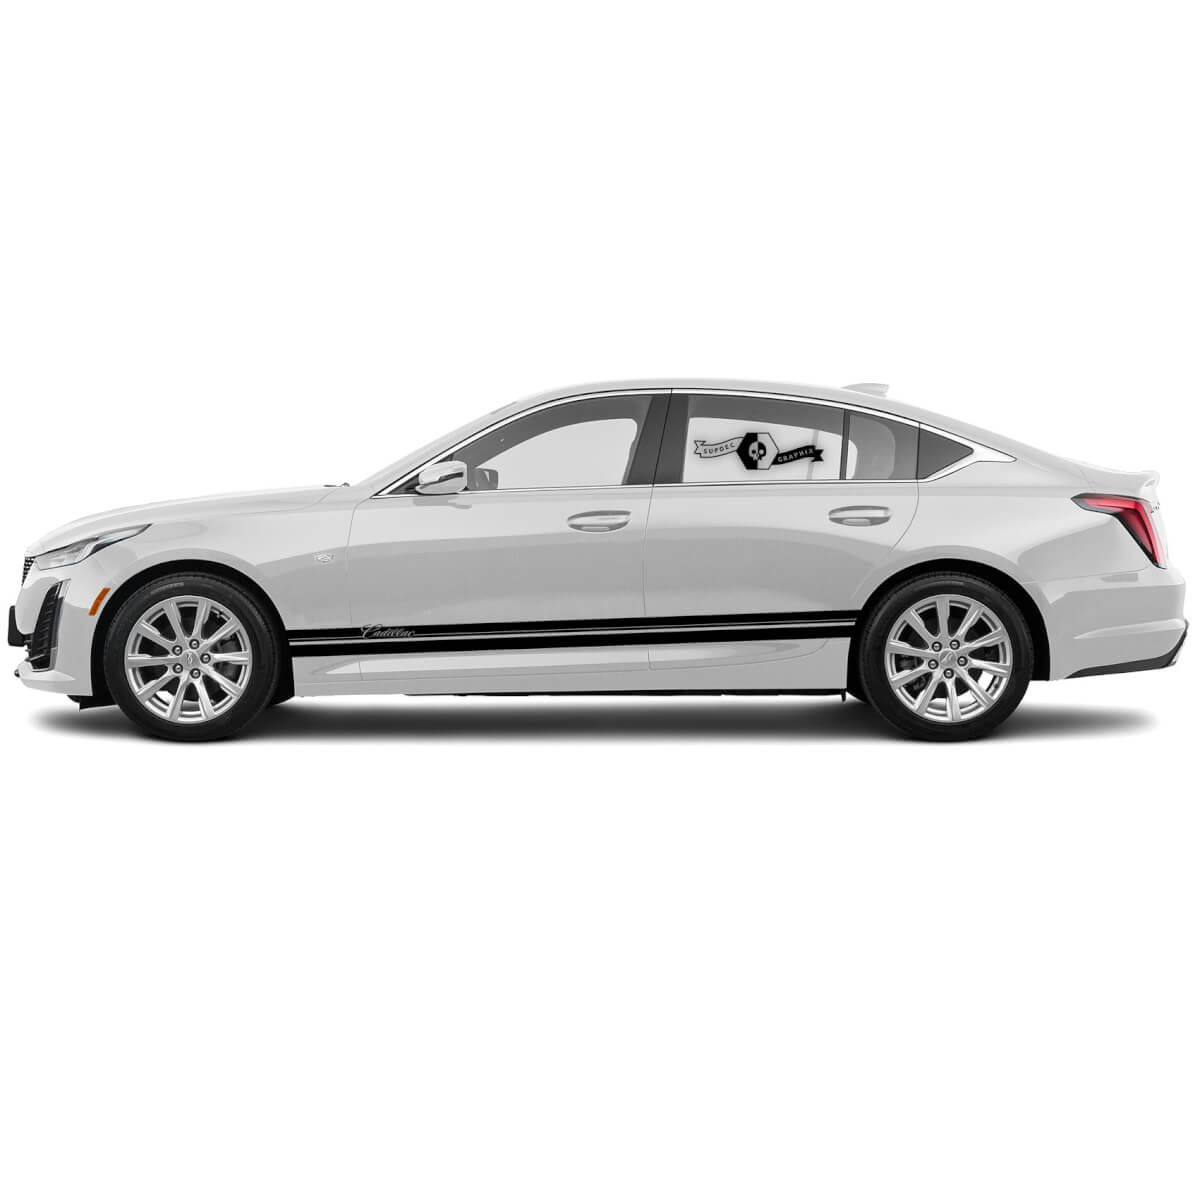 2 New Decal Sticker Stylish Rocker Panel Accent split Stripe vinyl Decal for Cadillac CT5